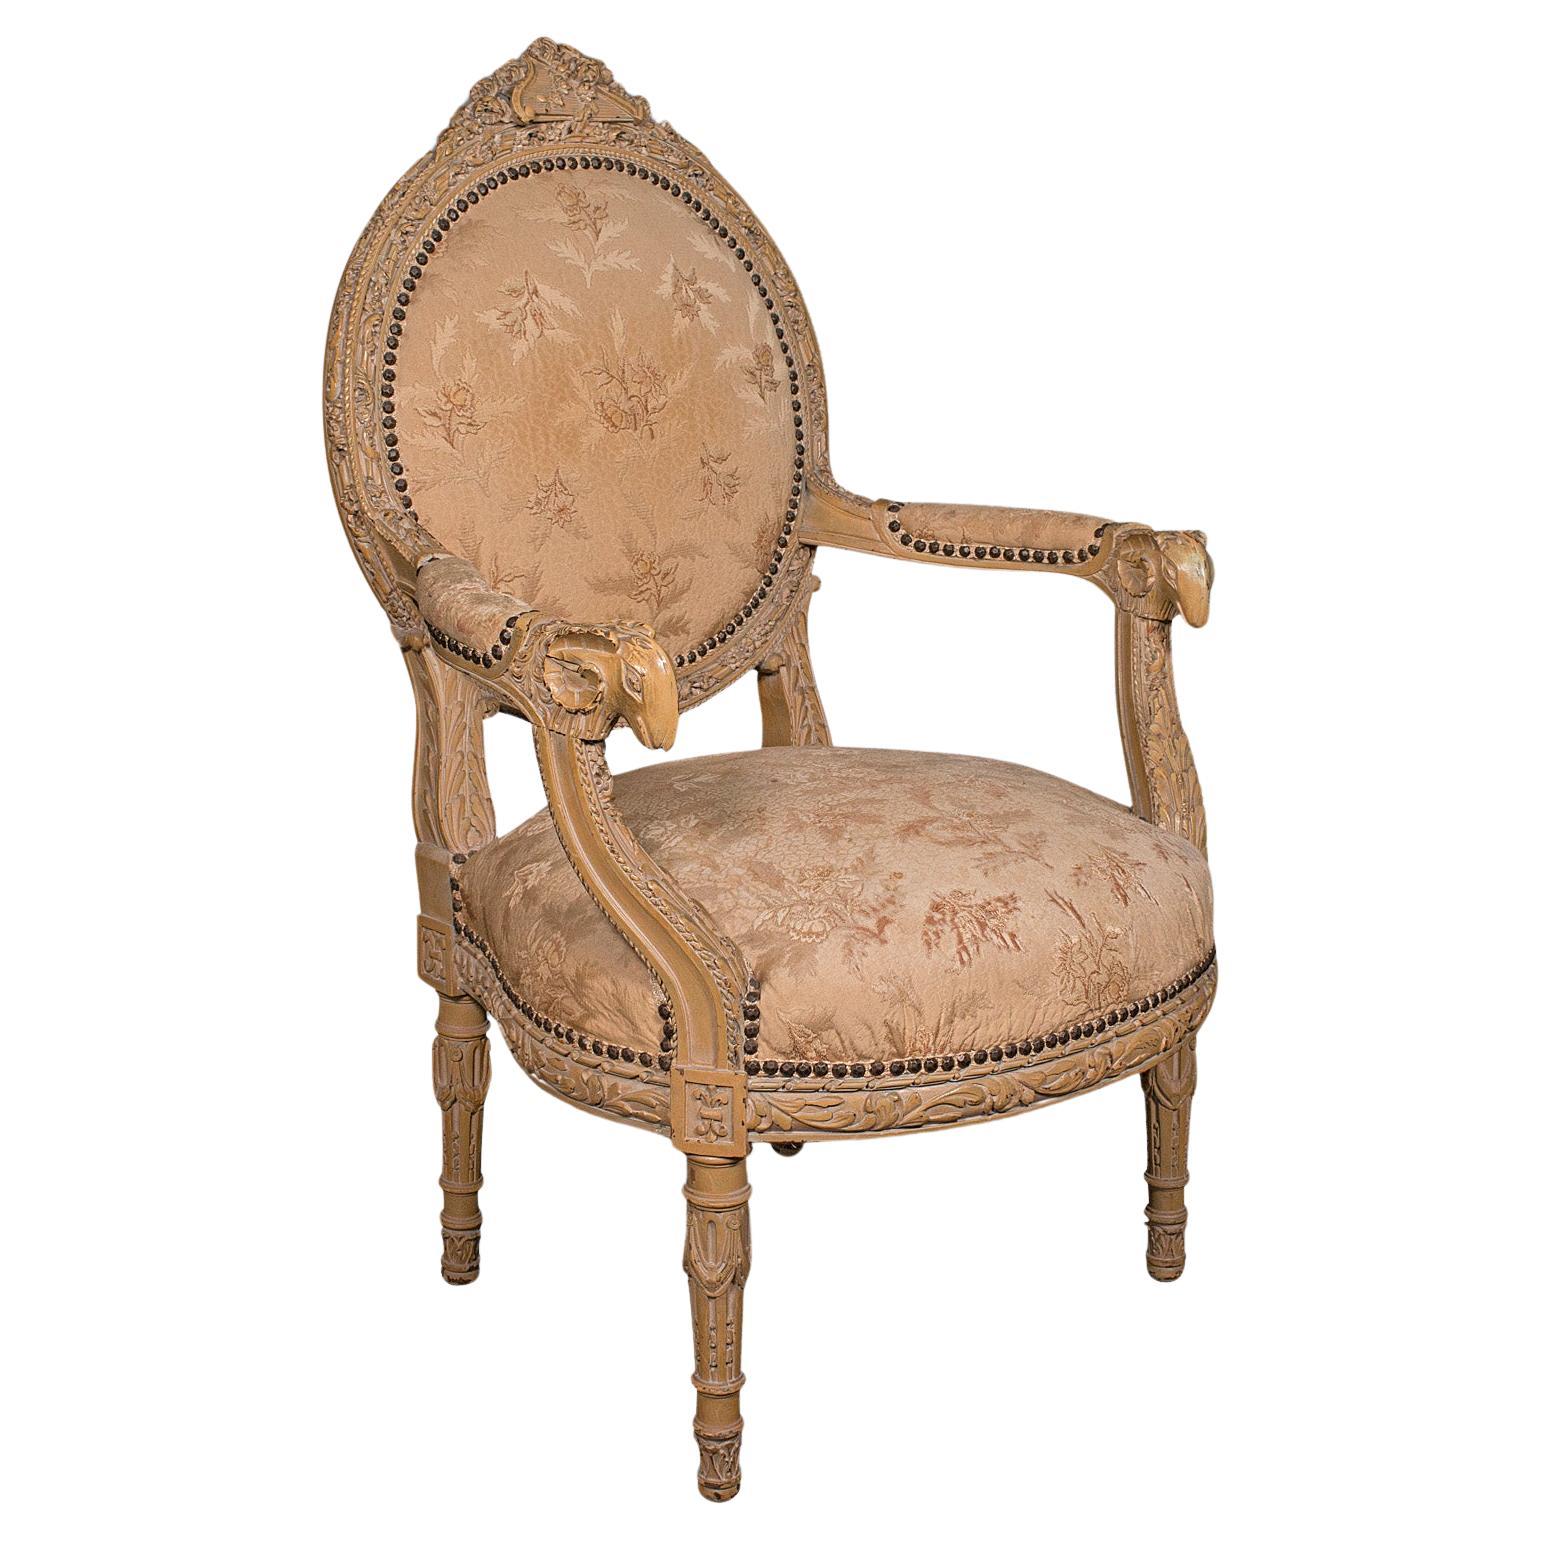 Antique Carved Armchair, French, Show Frame, Fauteuil Chair, Victorian, C.1870 For Sale